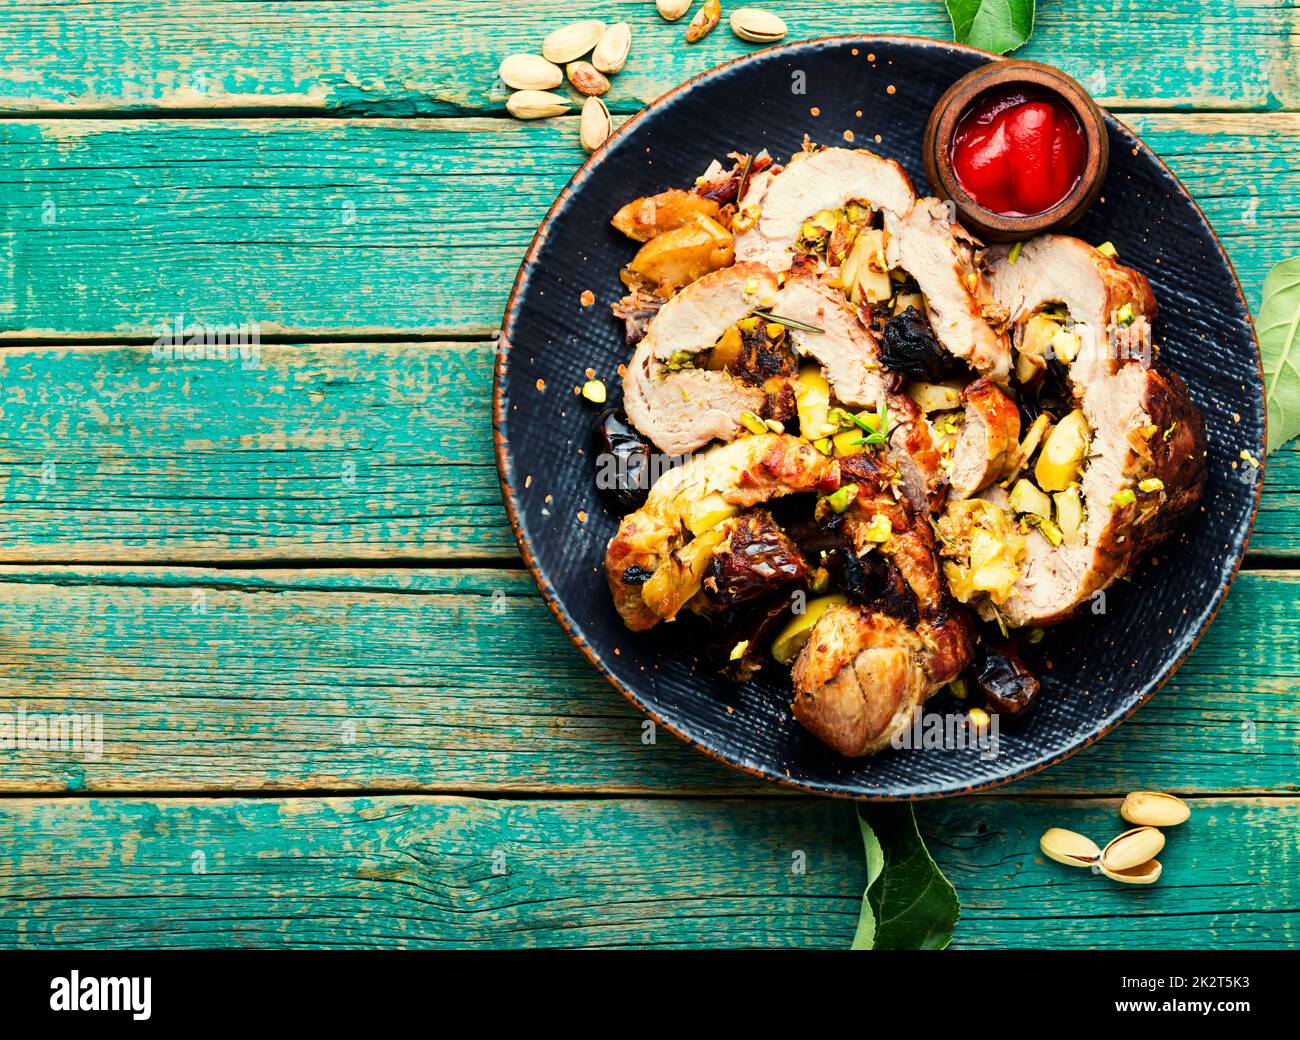 Roasted meat roll. Stock Photo